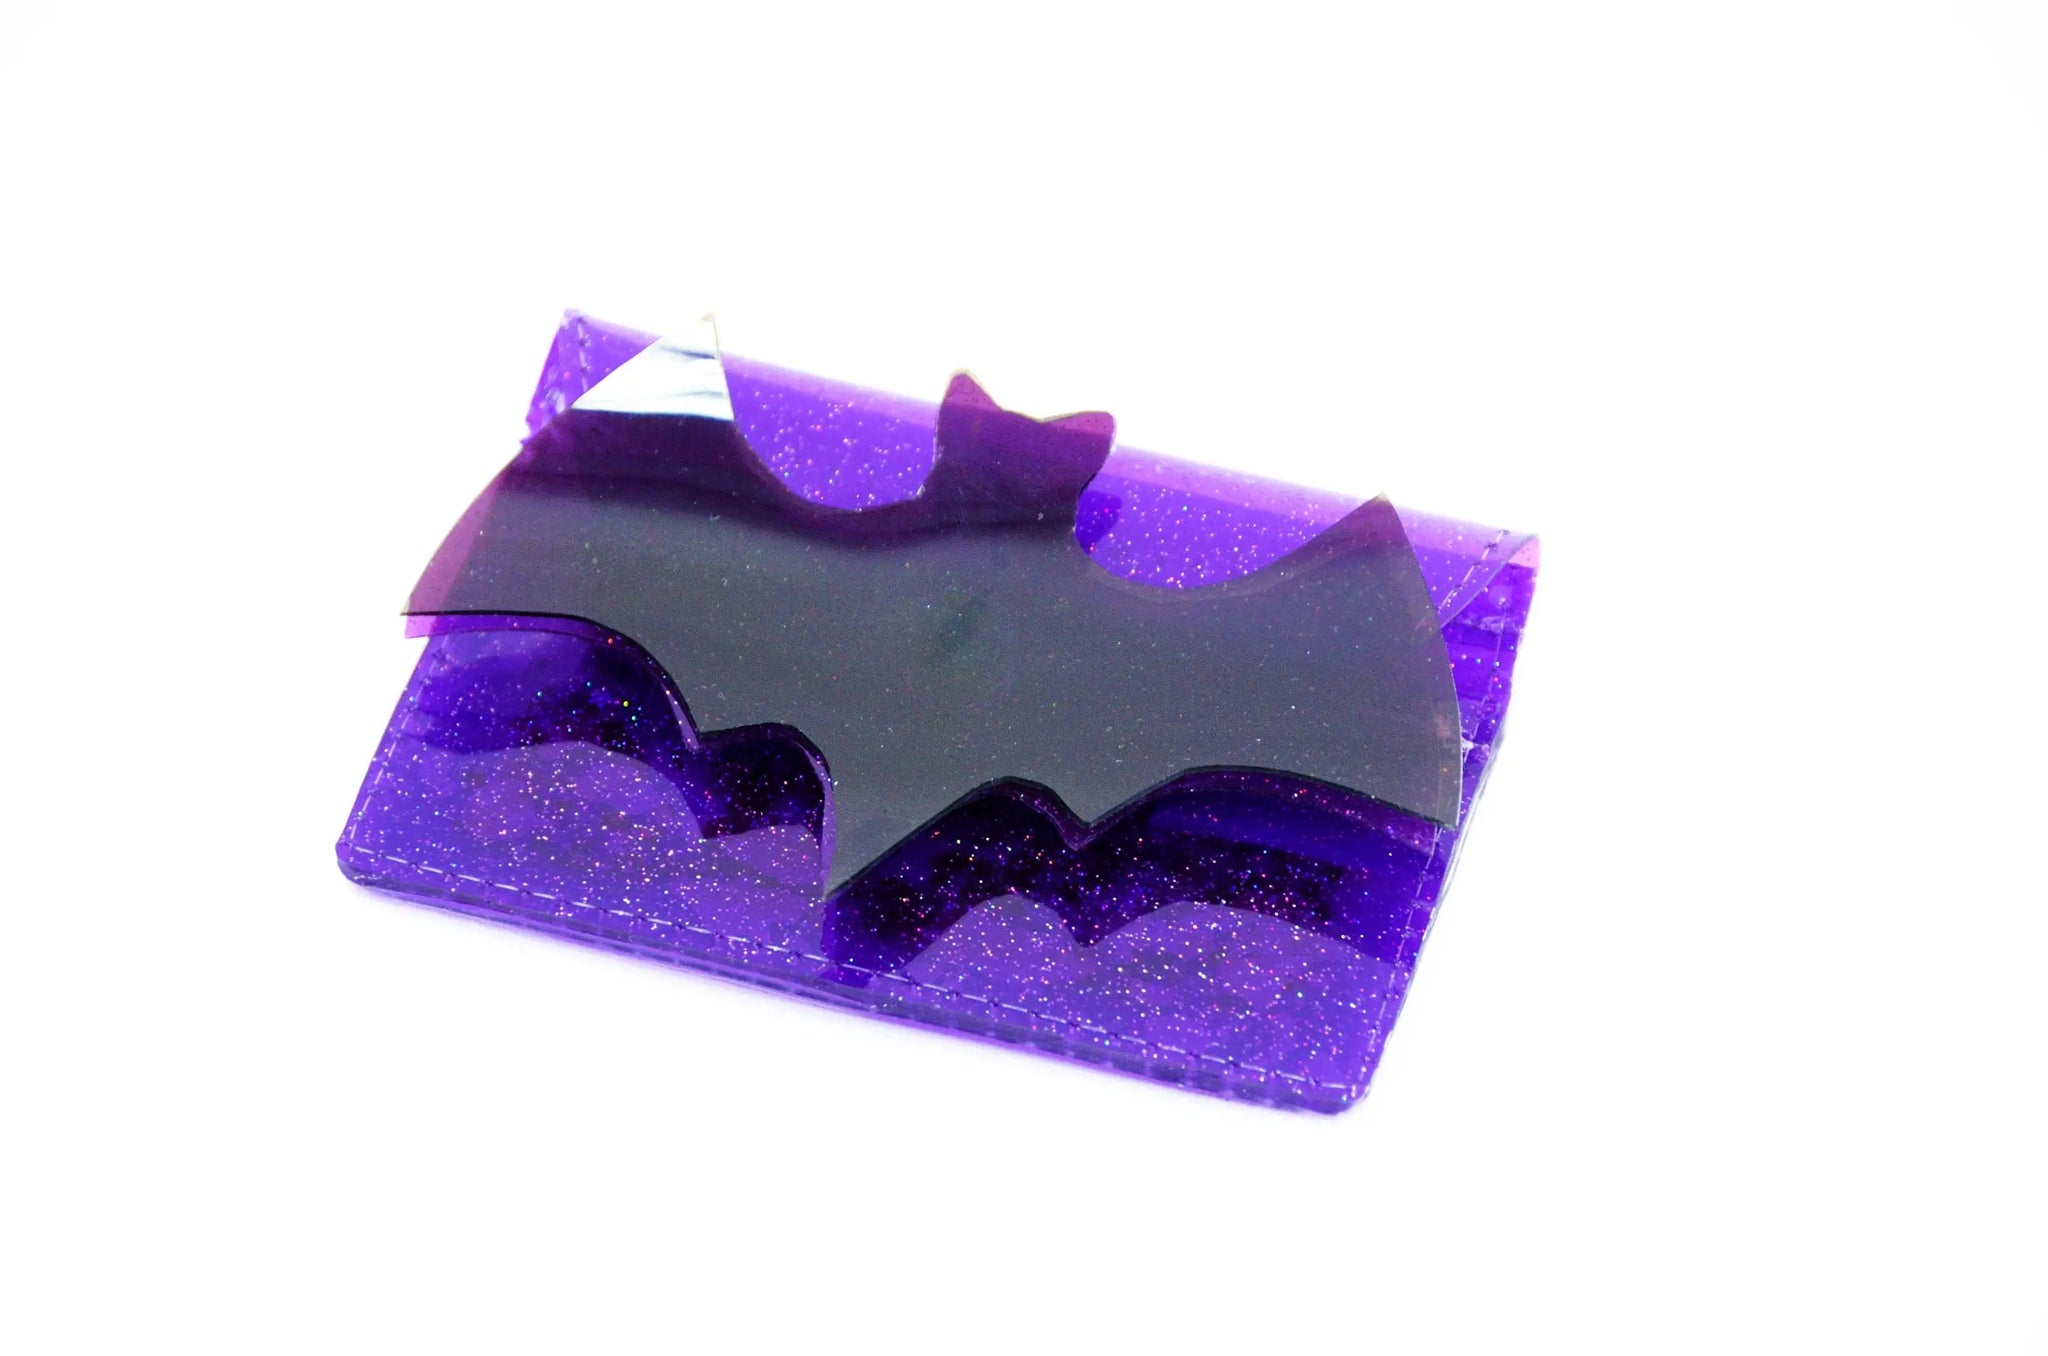 A purple glitter vinyl cardholder with a large purple vinyl bat on its fromt